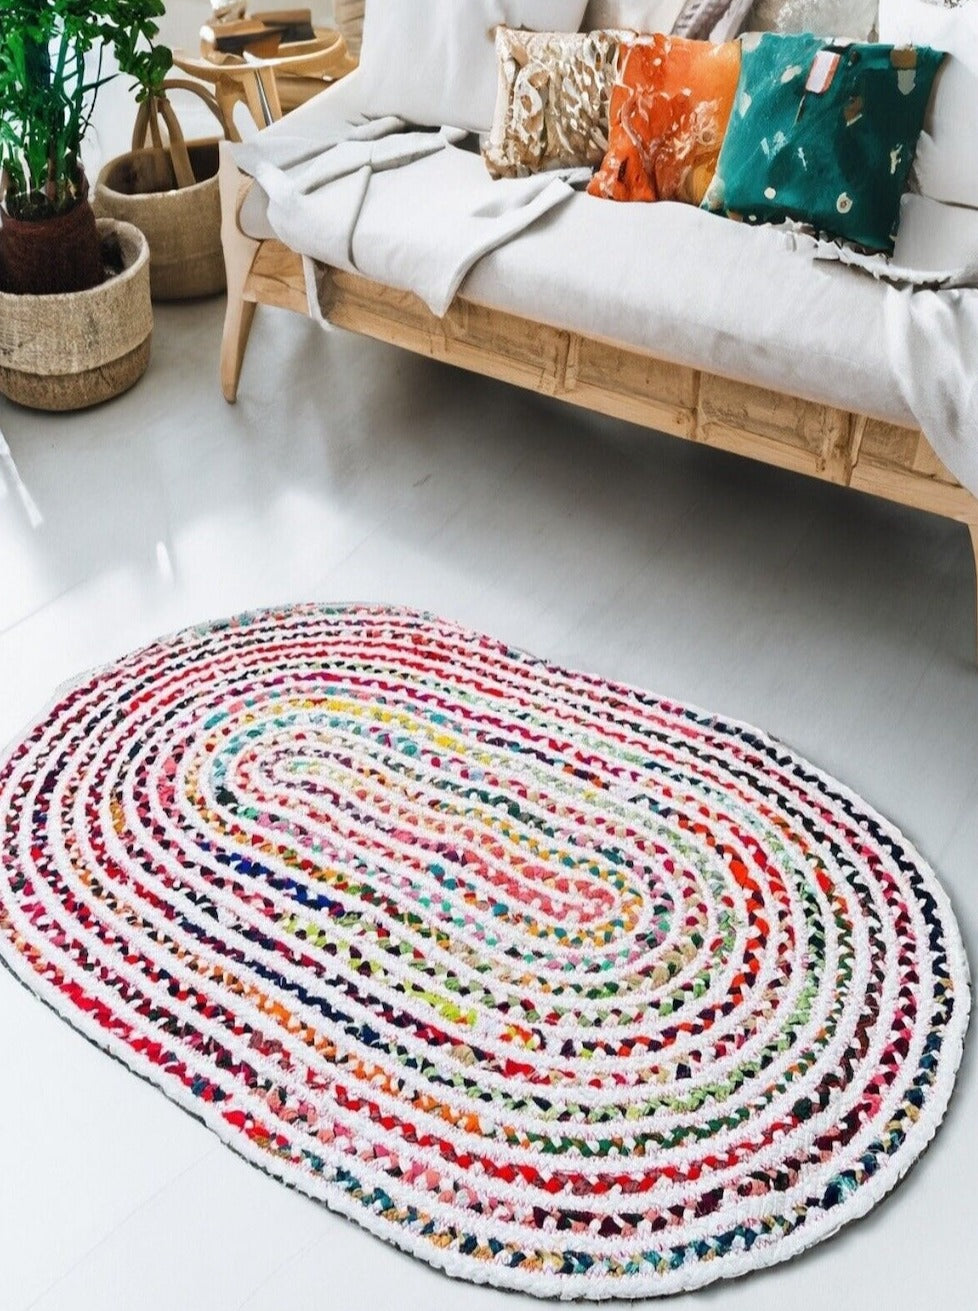 CARNIVAL Oval Bedroom Rug Ethical Source with Recycled Fabric